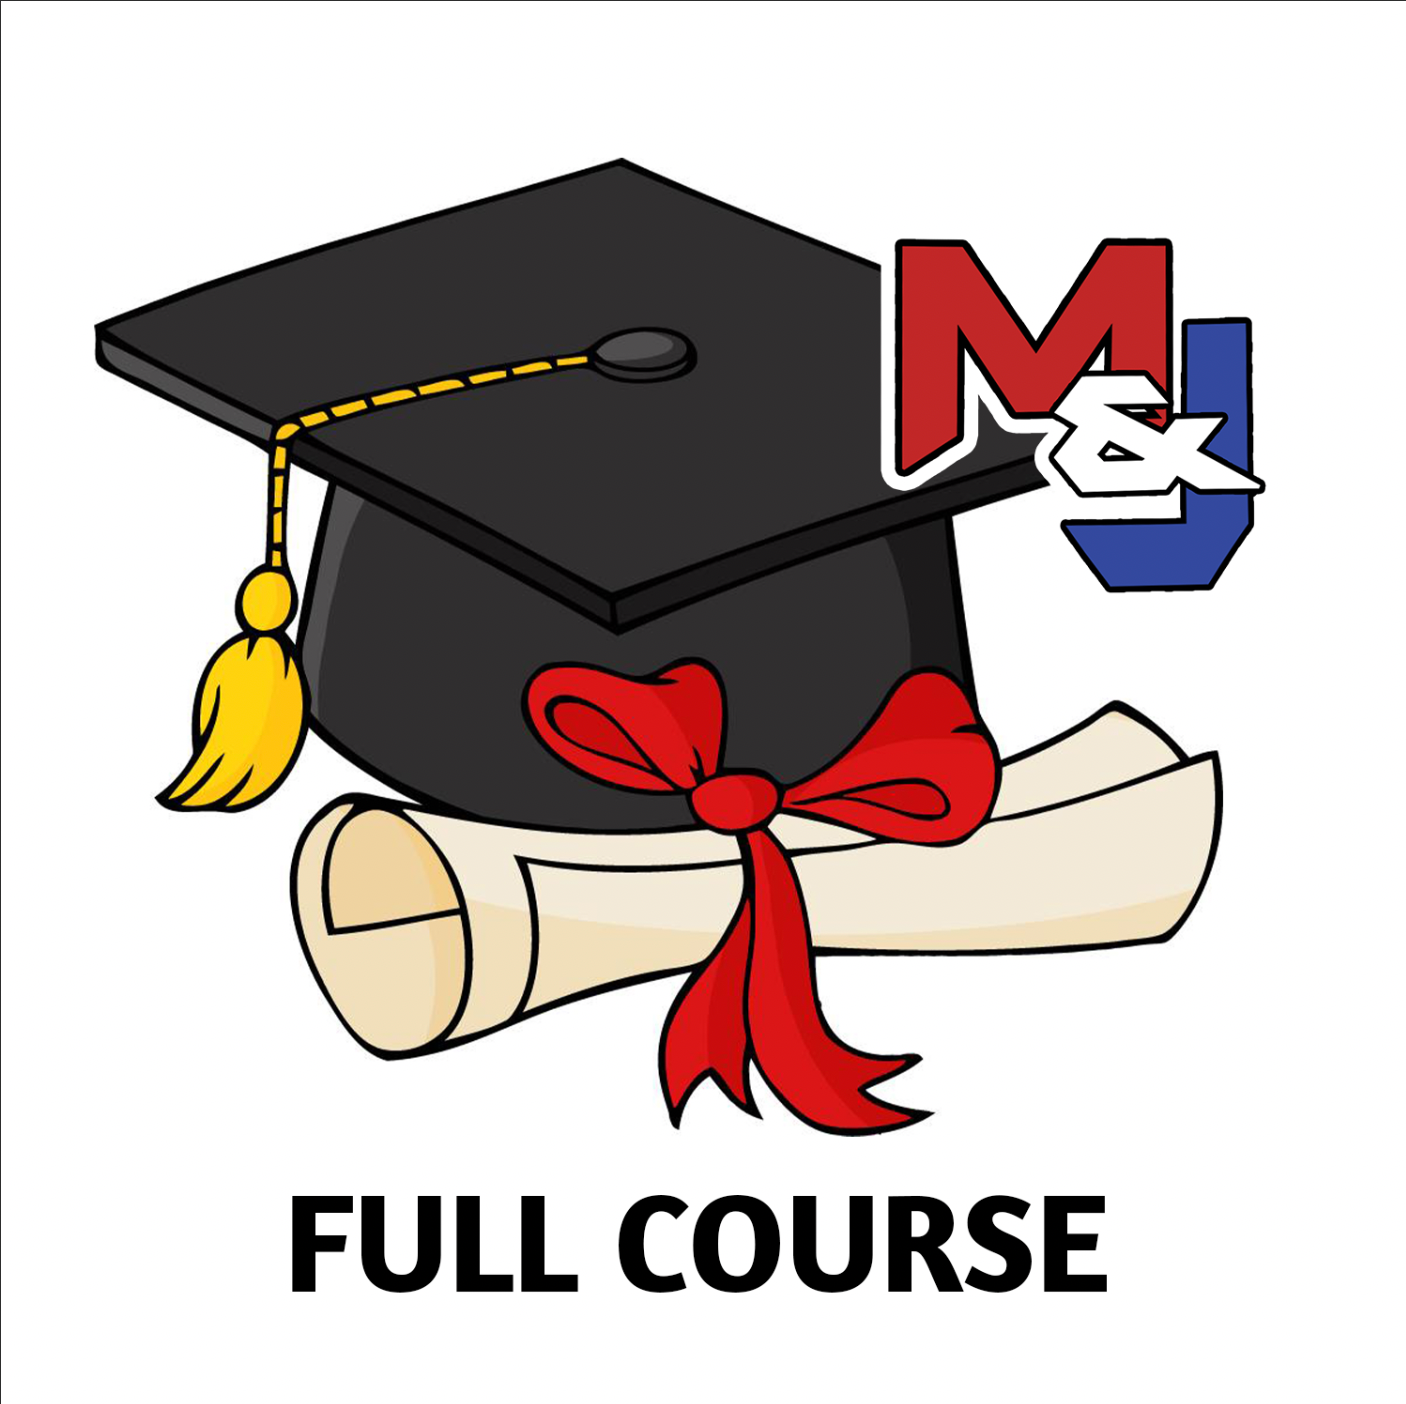 M&J Barber Academy Full Course